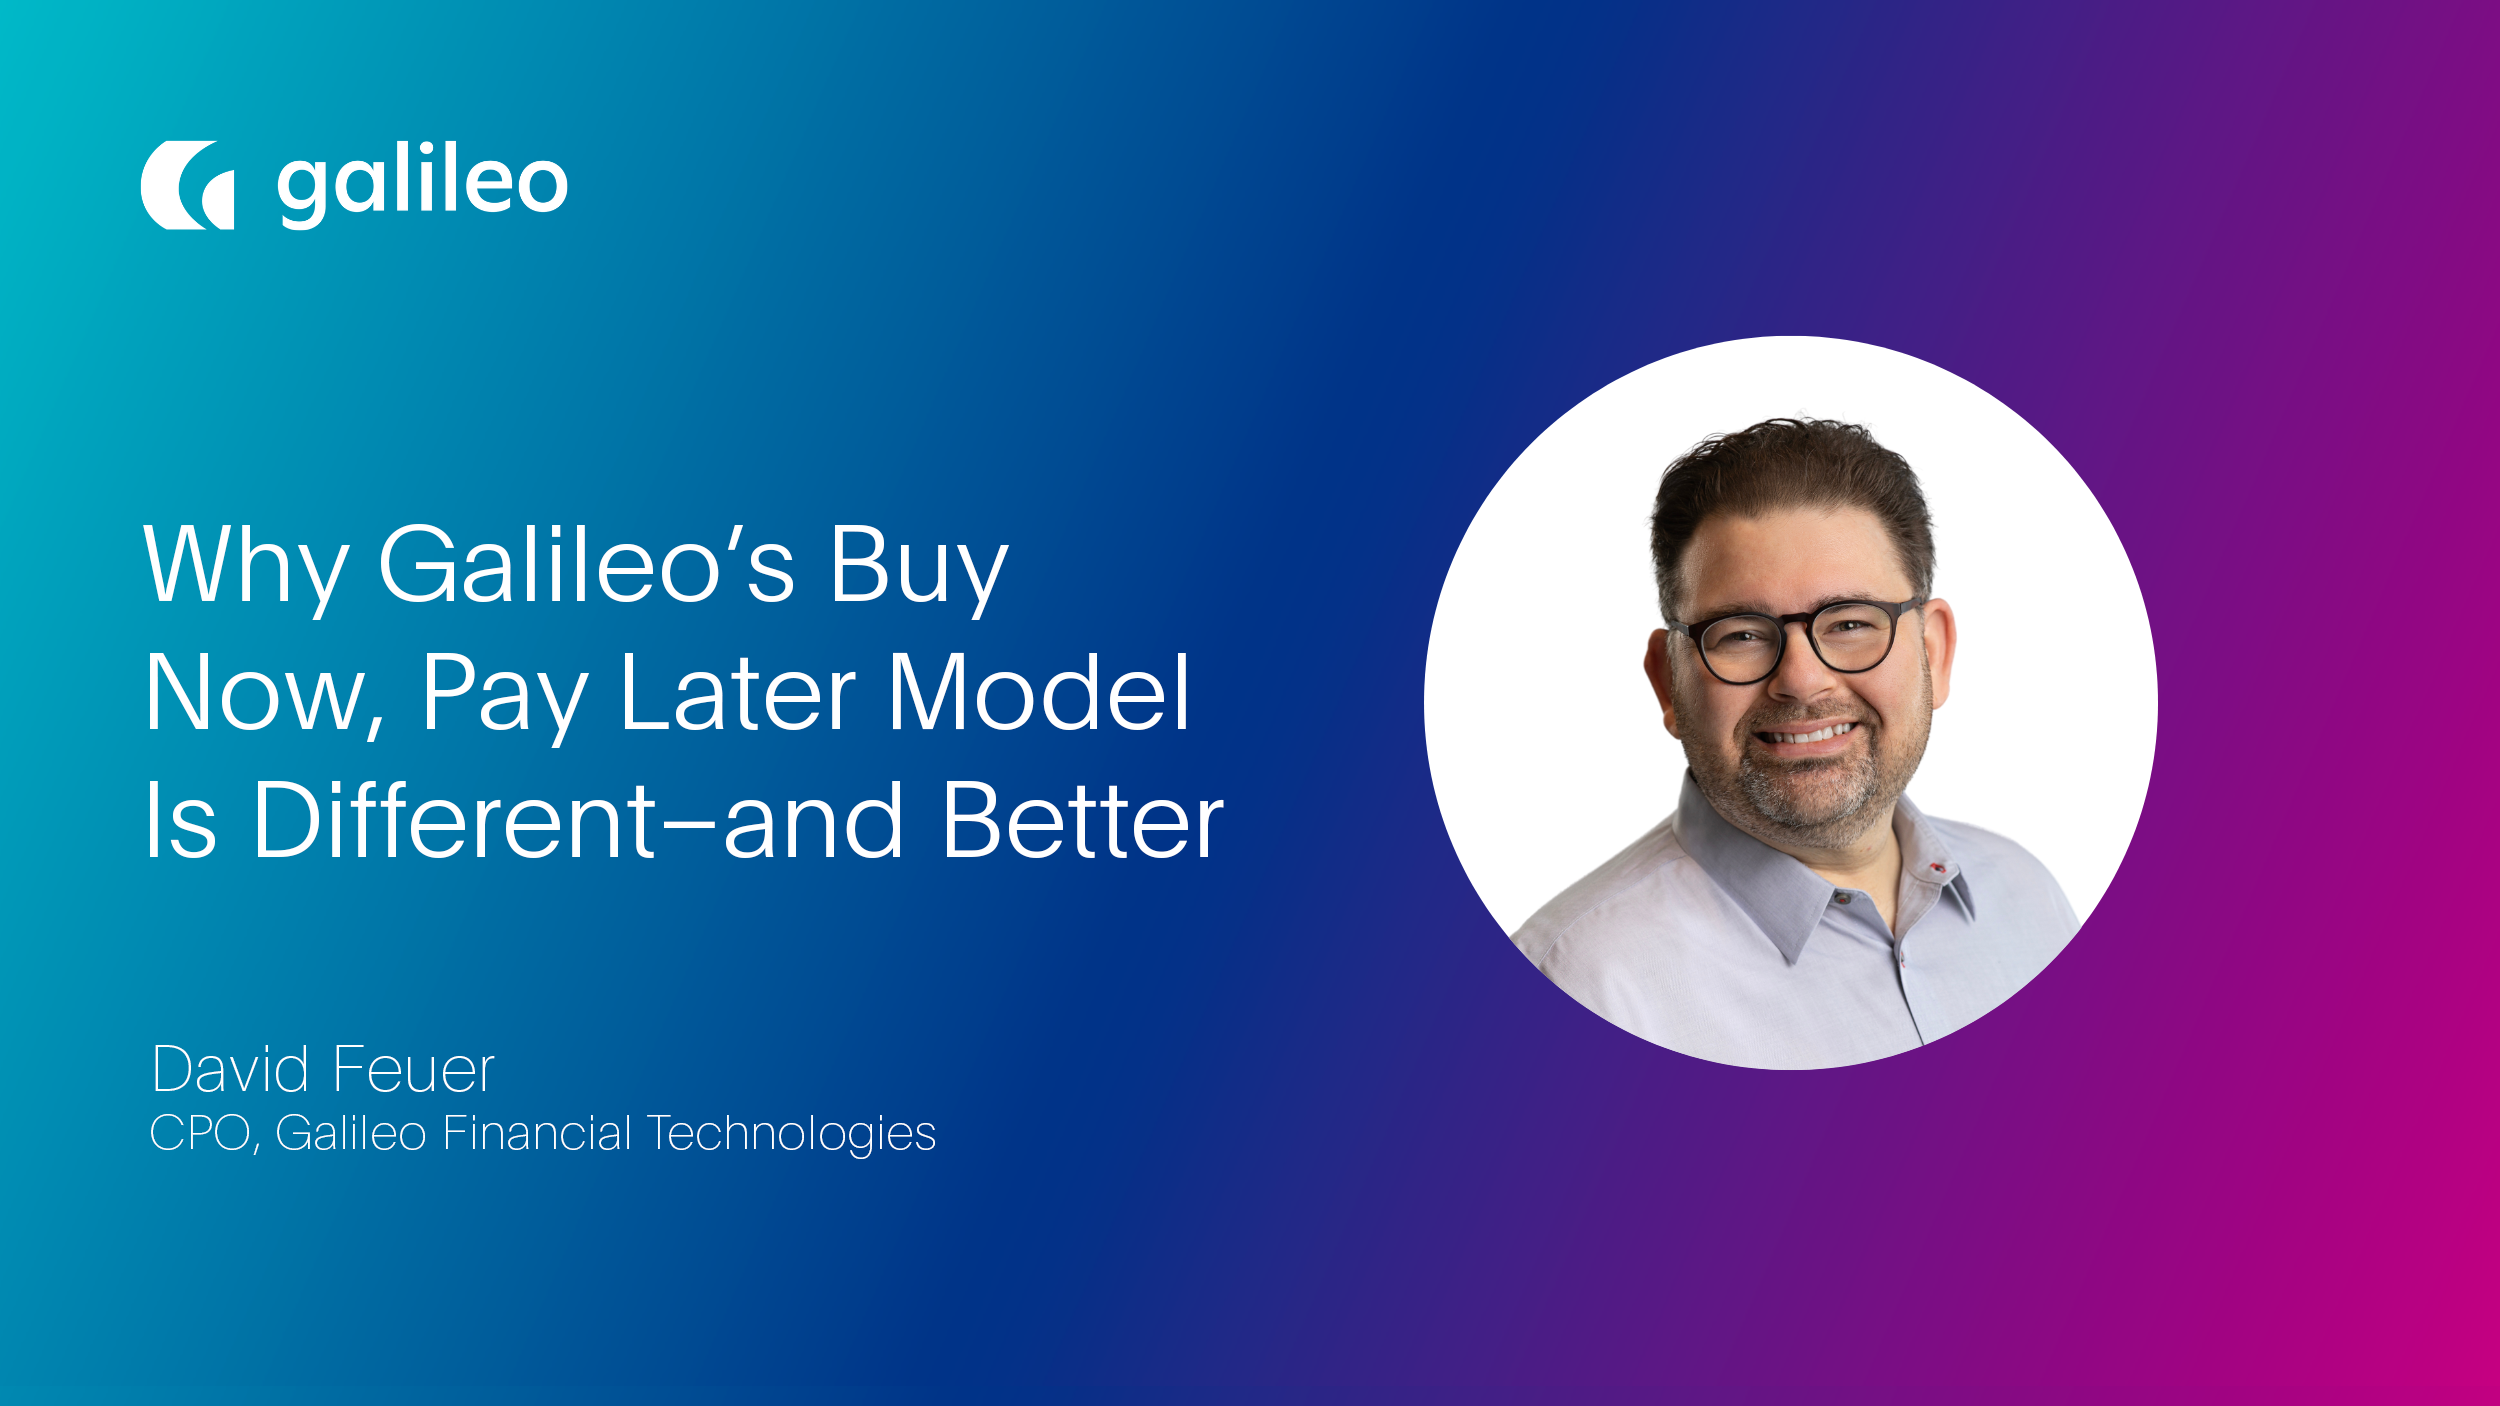 Galileo CPO David Feuer explains a different approach to Buy Now, Pay Later and how banks and fintechs can serve consumers better. 